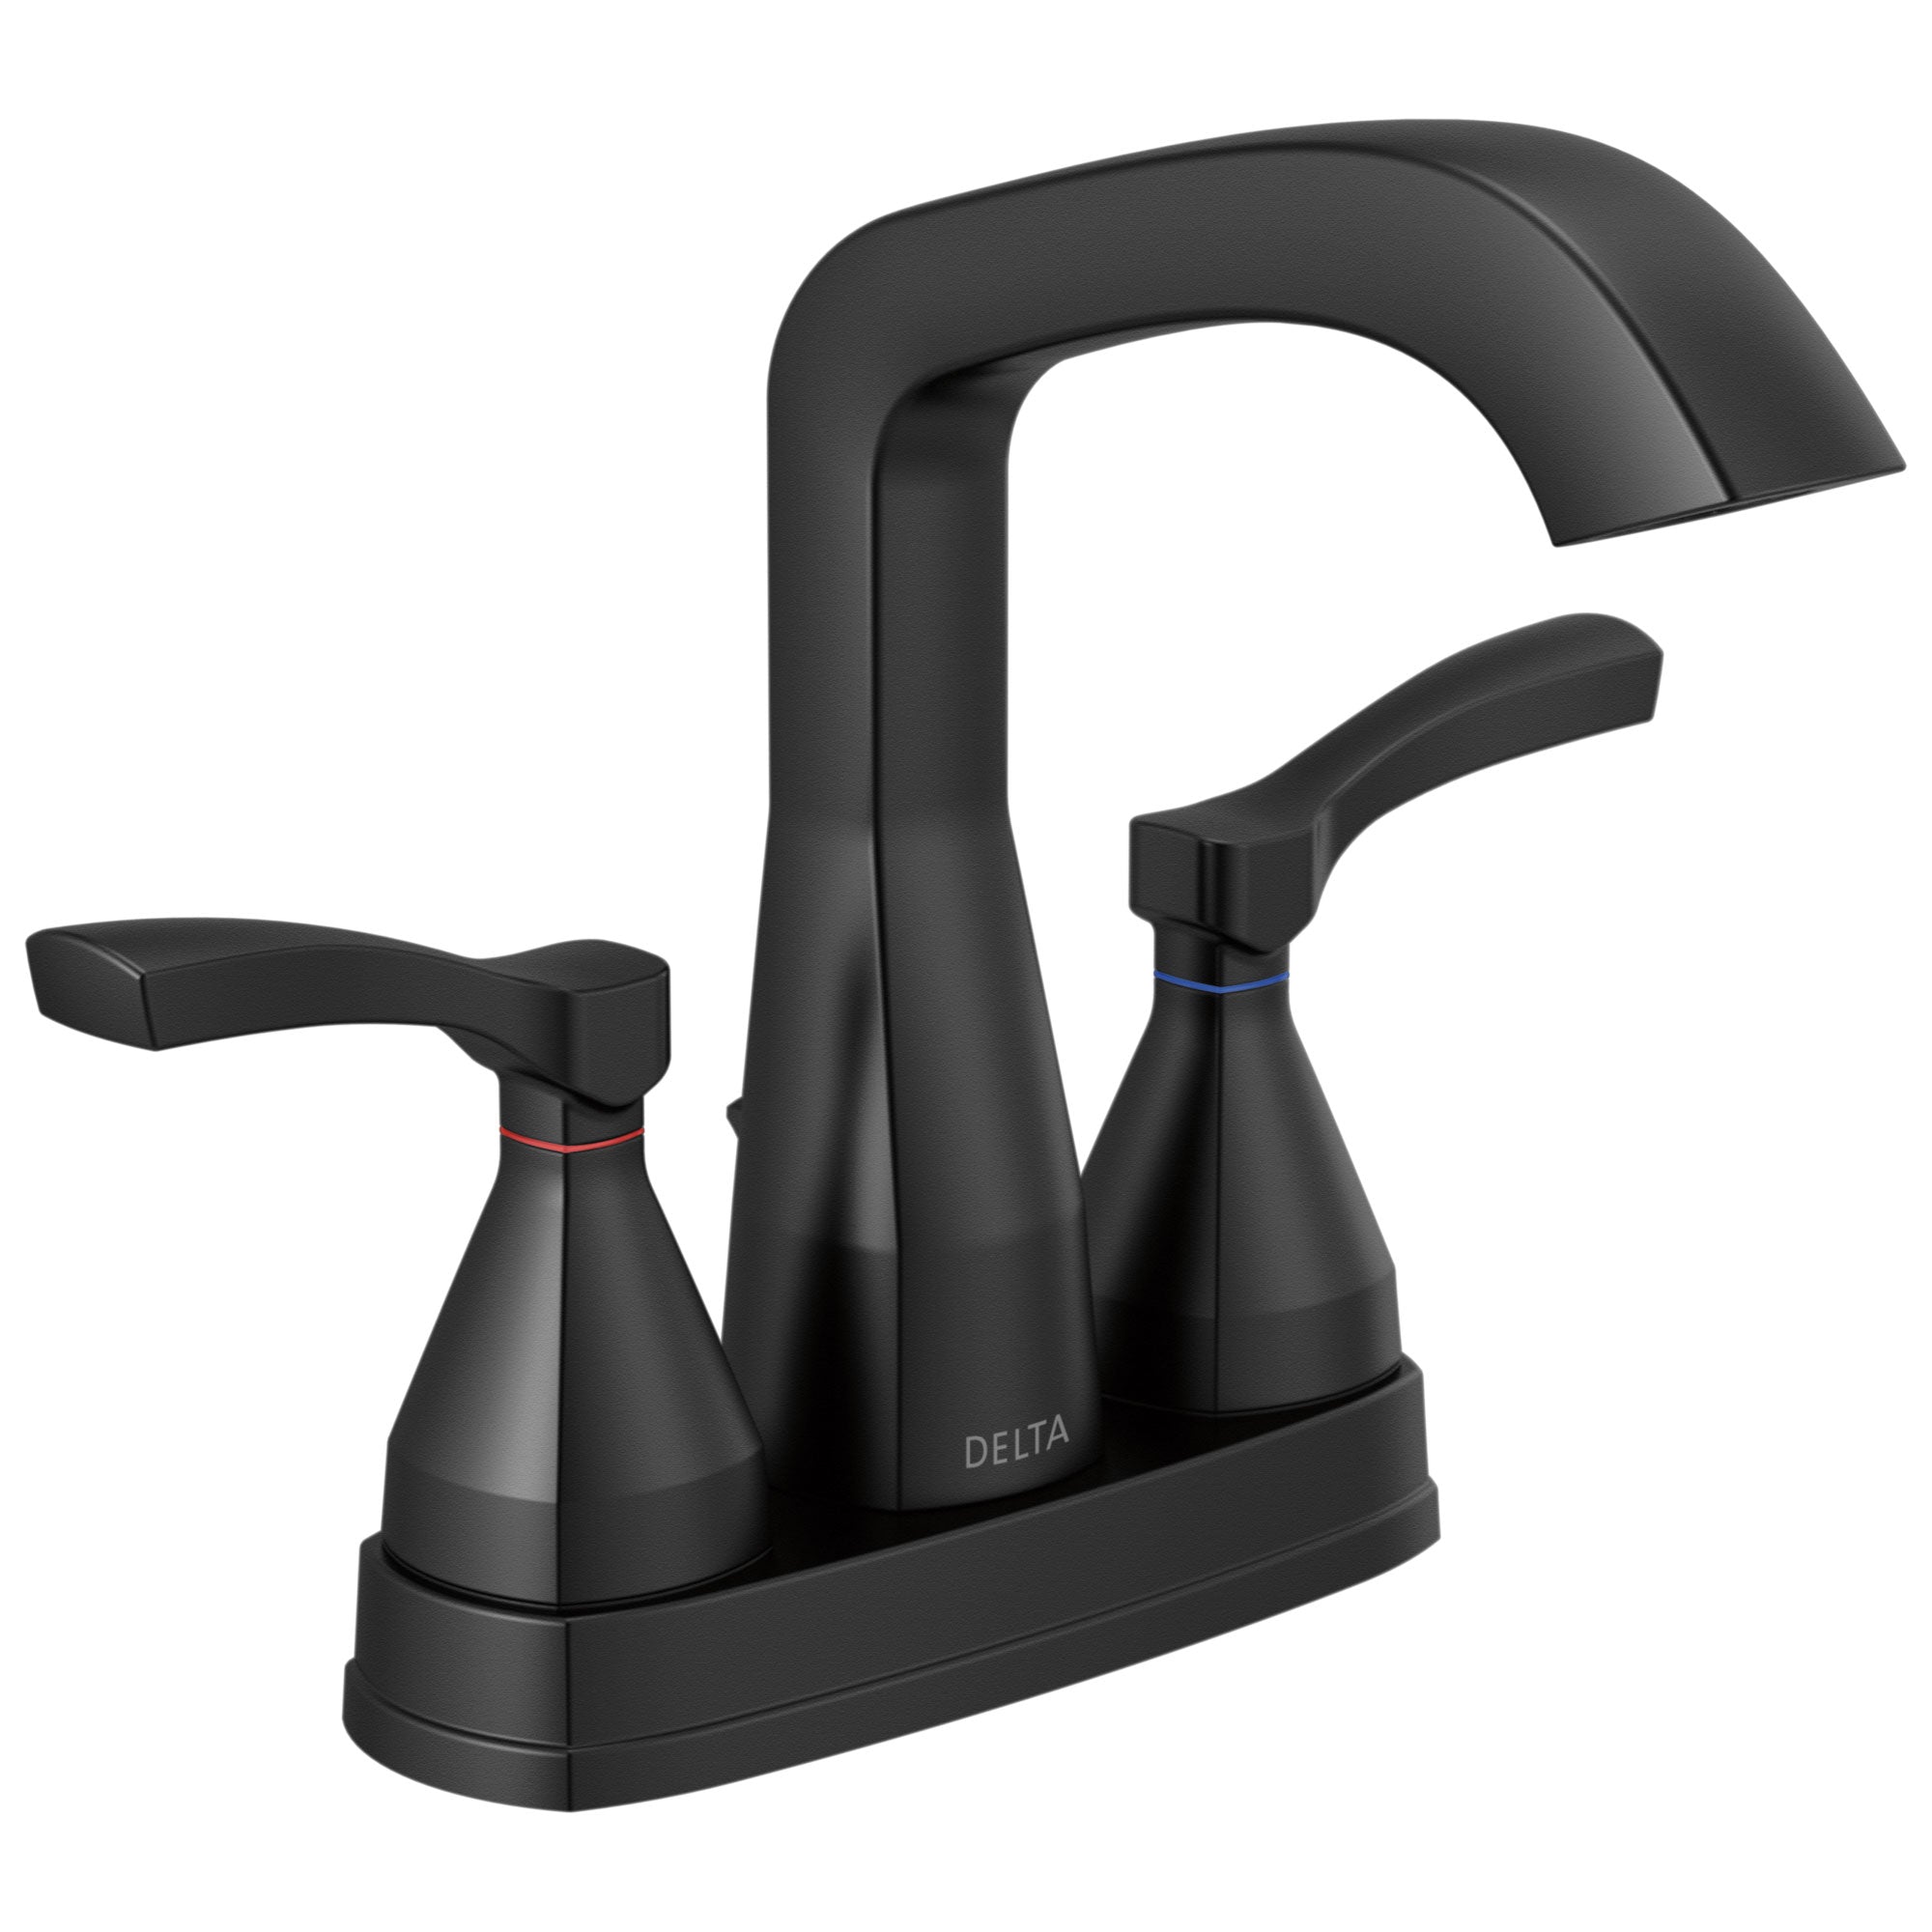 Delta Stryke Matte Black Finish Centerset Bathroom Sink Faucet with Matching Drain and Lever Handles D25776BLMPUDST